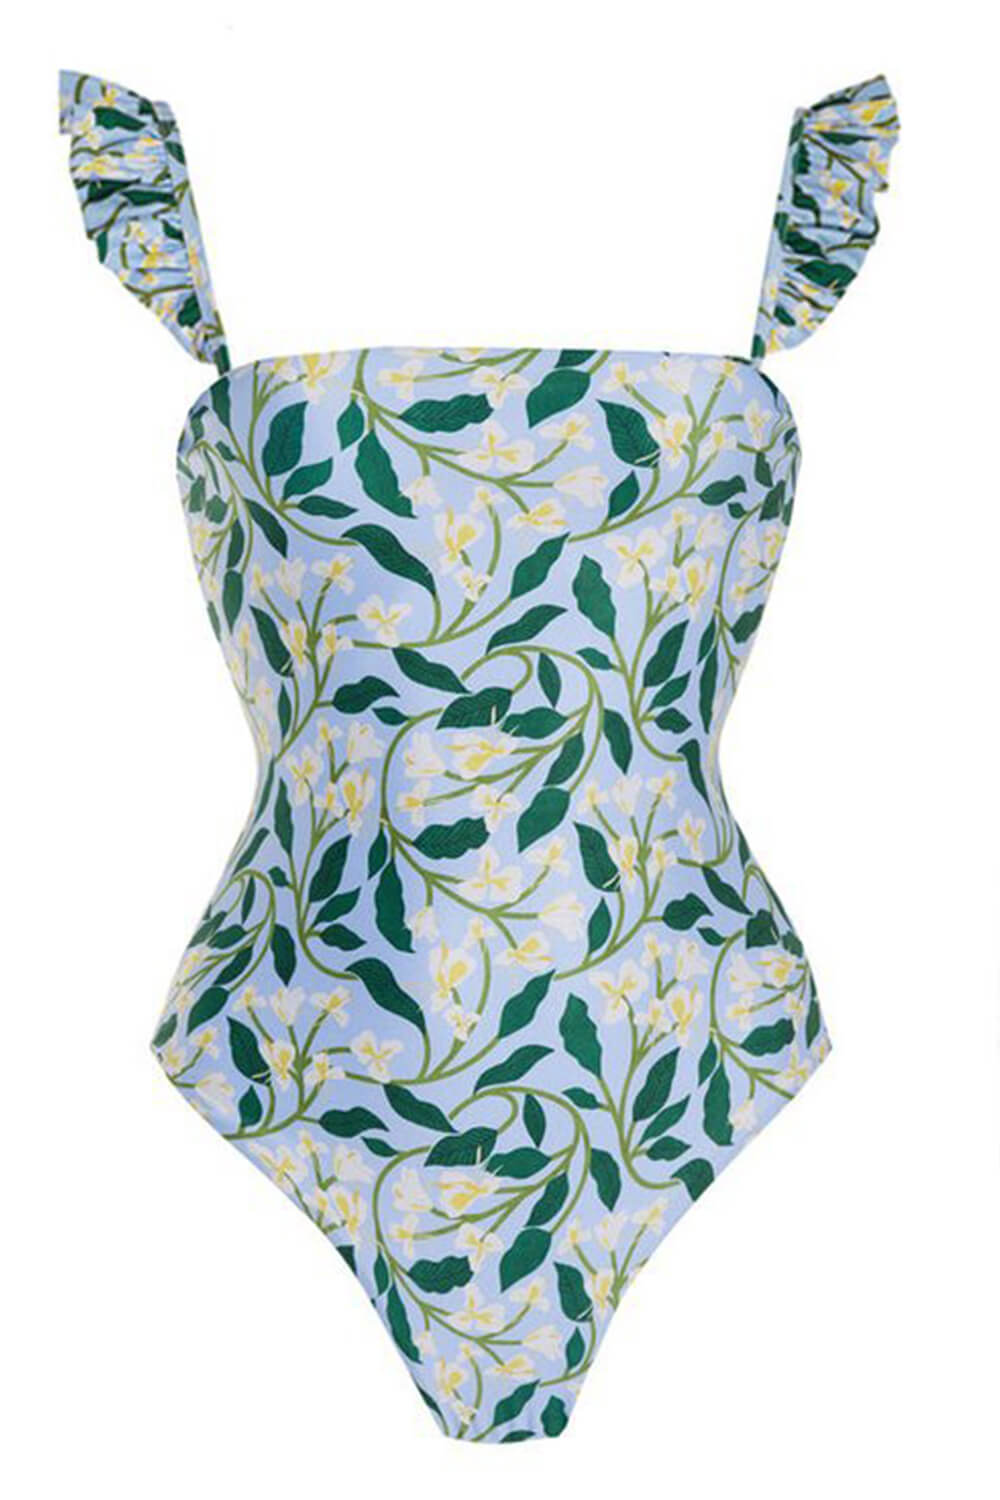 Floral Print Ruffle-Trimmed One Piece Swimsuit